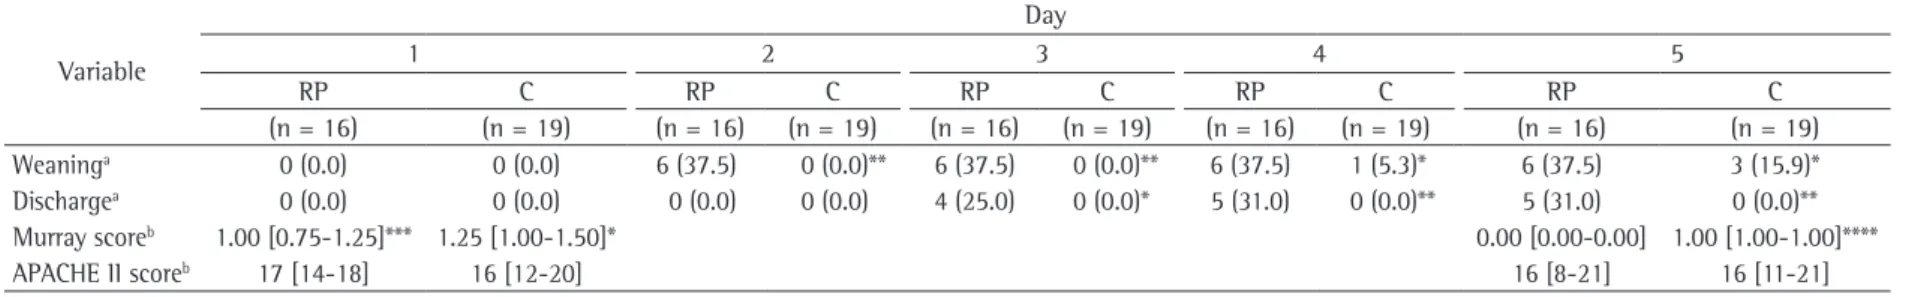 Table 3 - Effect of the 5-day respiratory physiotherapy on weaning from mechanical ventilation, ICU discharge, and disease severity scores.